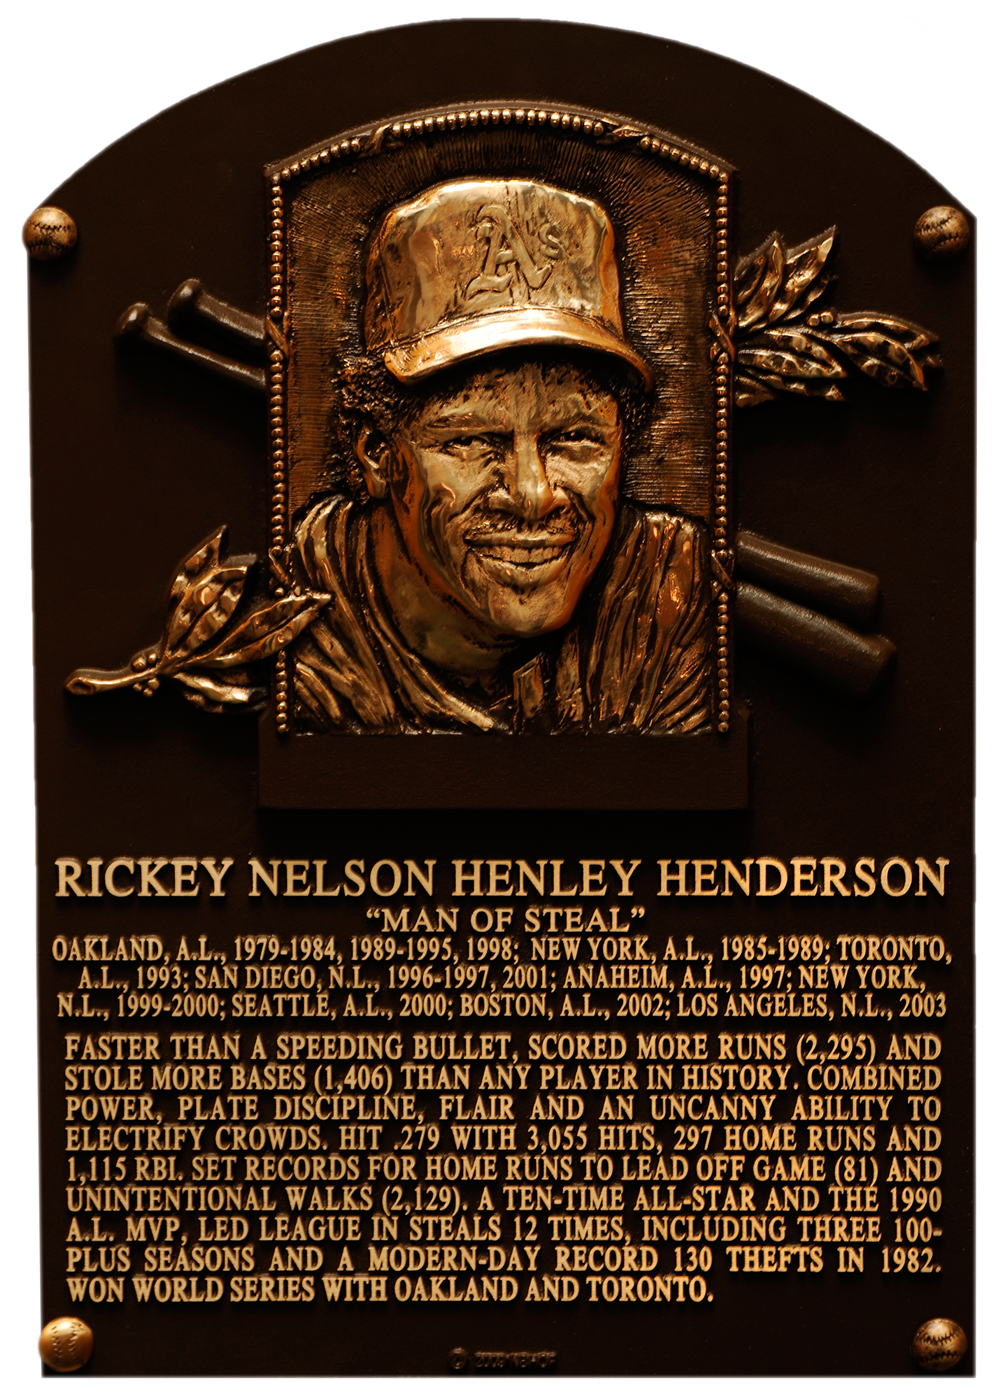 Rickey Henderson Hall of Fame plaque